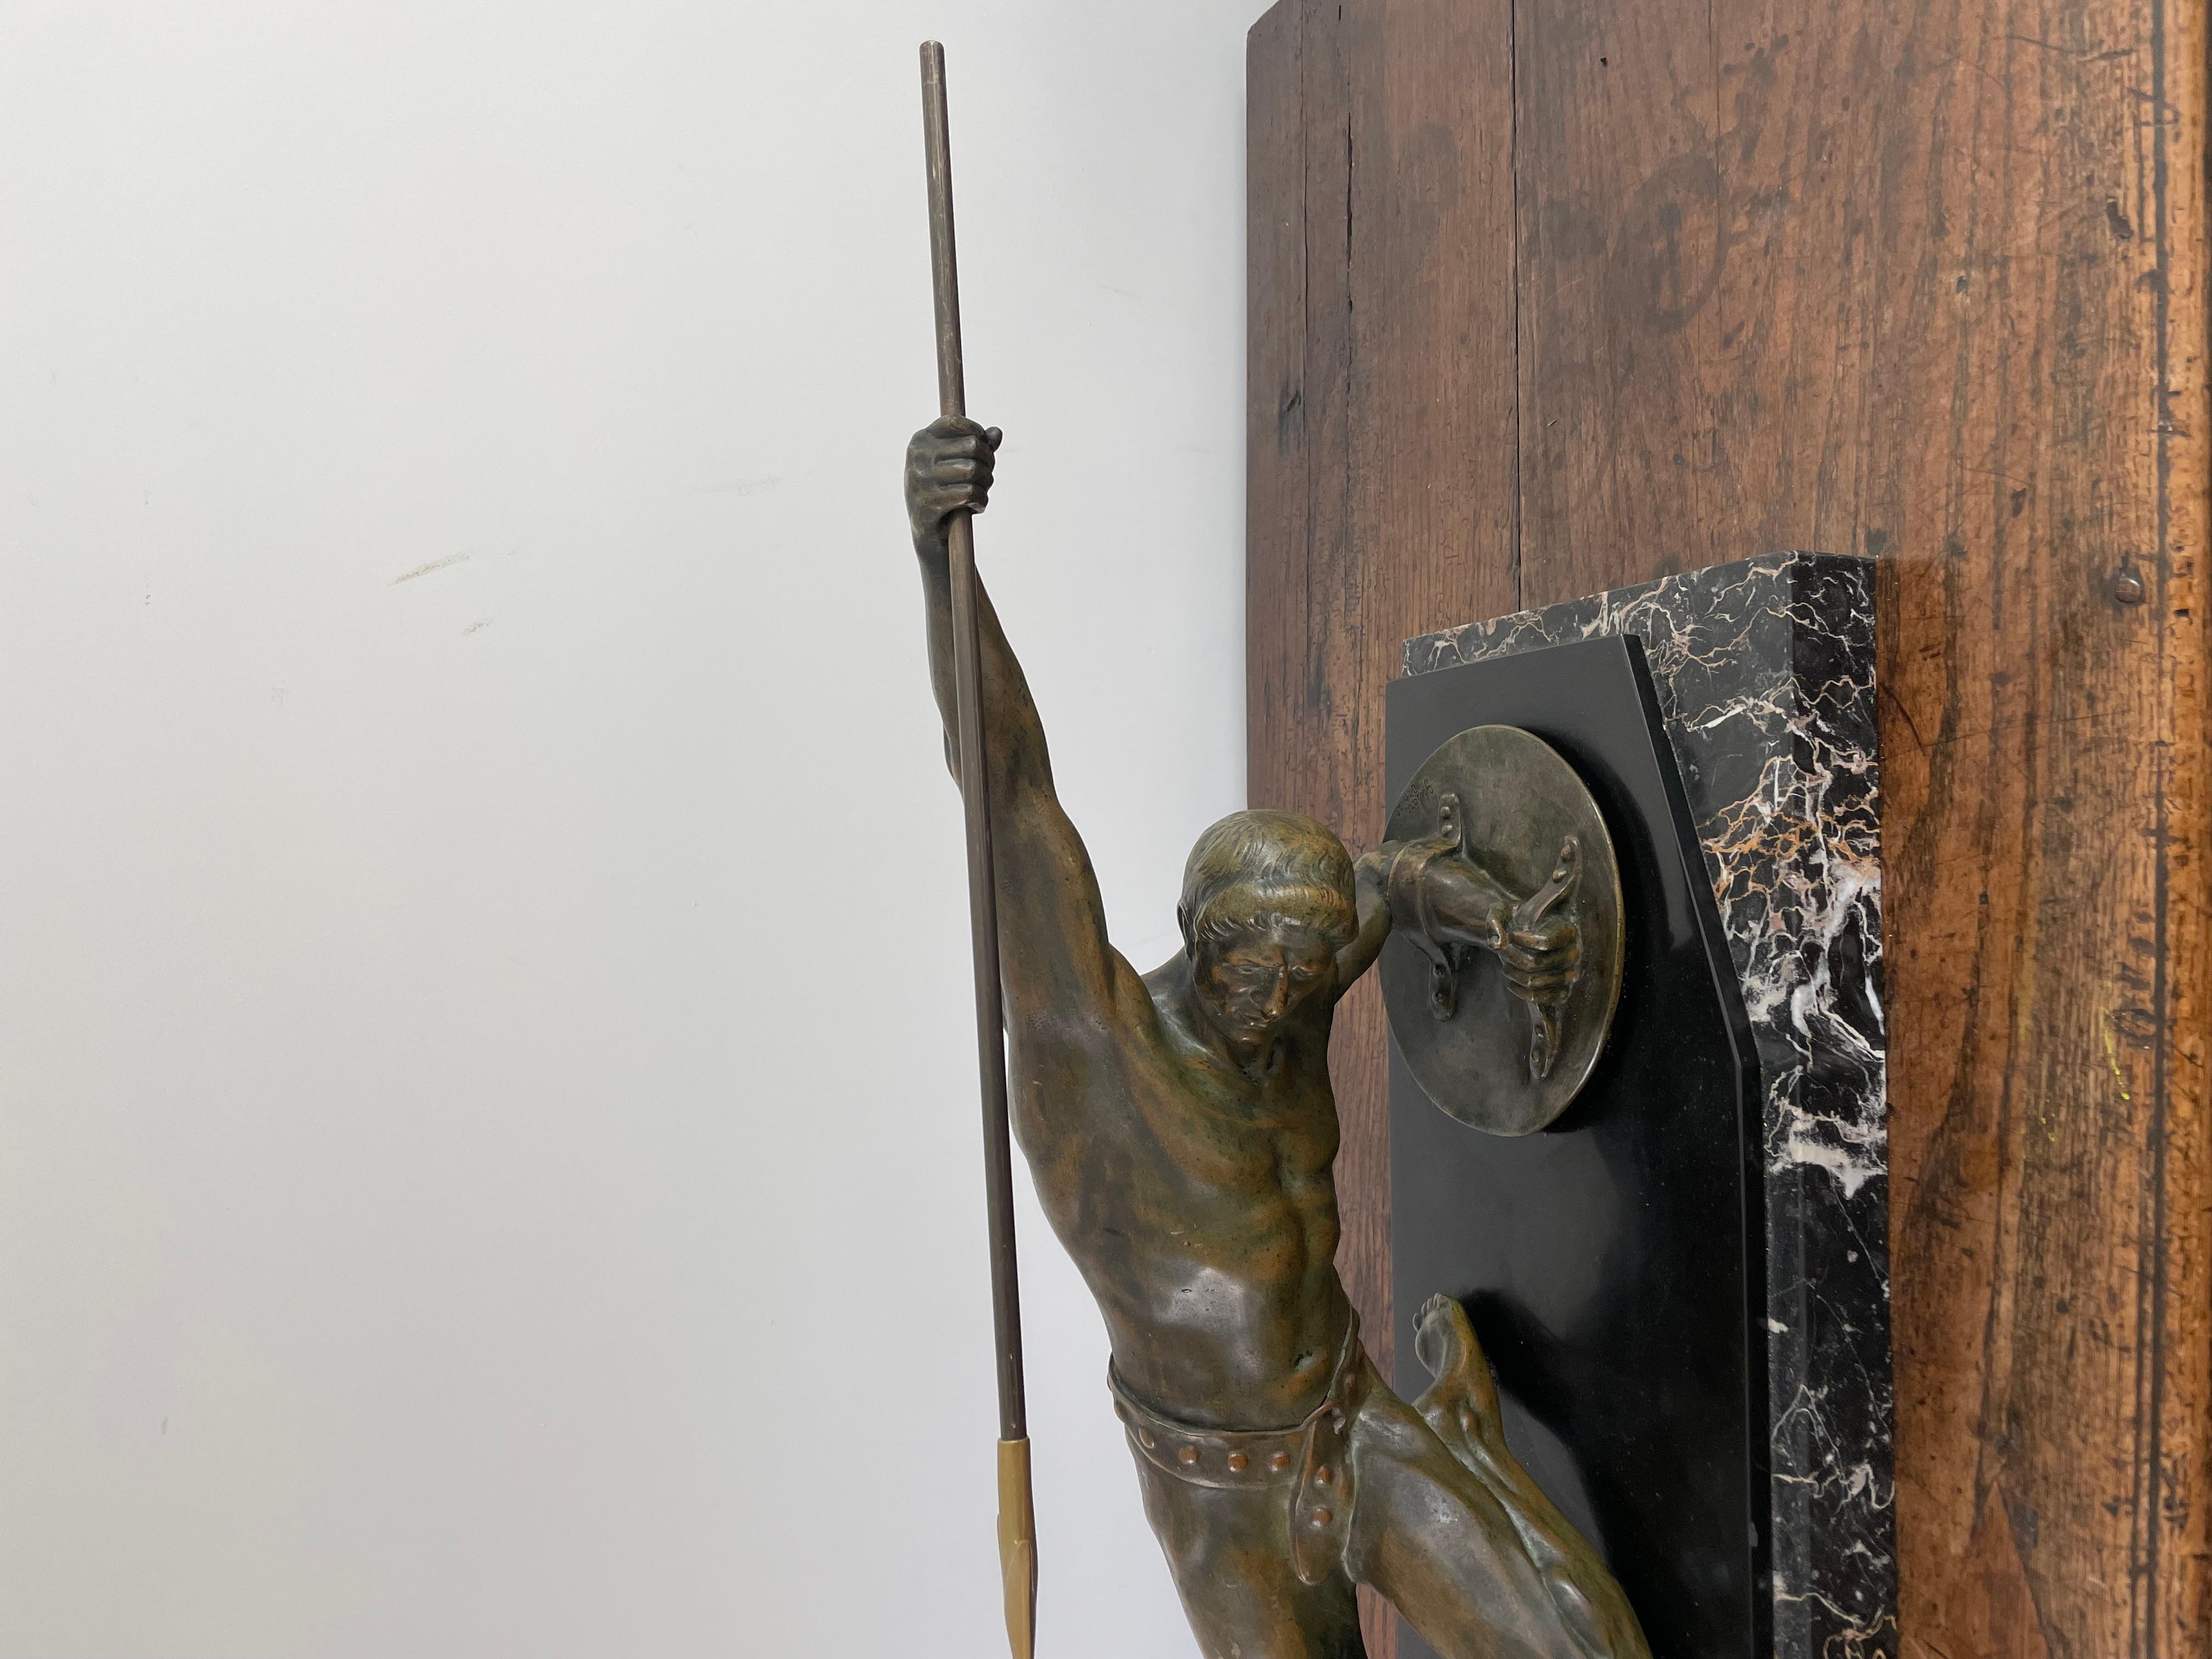 Stunning Art Deco bronze sculpture of a gladiator with spear and shield
Circa 1925 signed Desire Grisard , bronze
Mounted on black Belgian slate base and veined black marble
L. 86 cm. x H. 37 cm x W. 23.5 cm.
L. 33.9 inch x H. 14.6 inch x W. 9.3